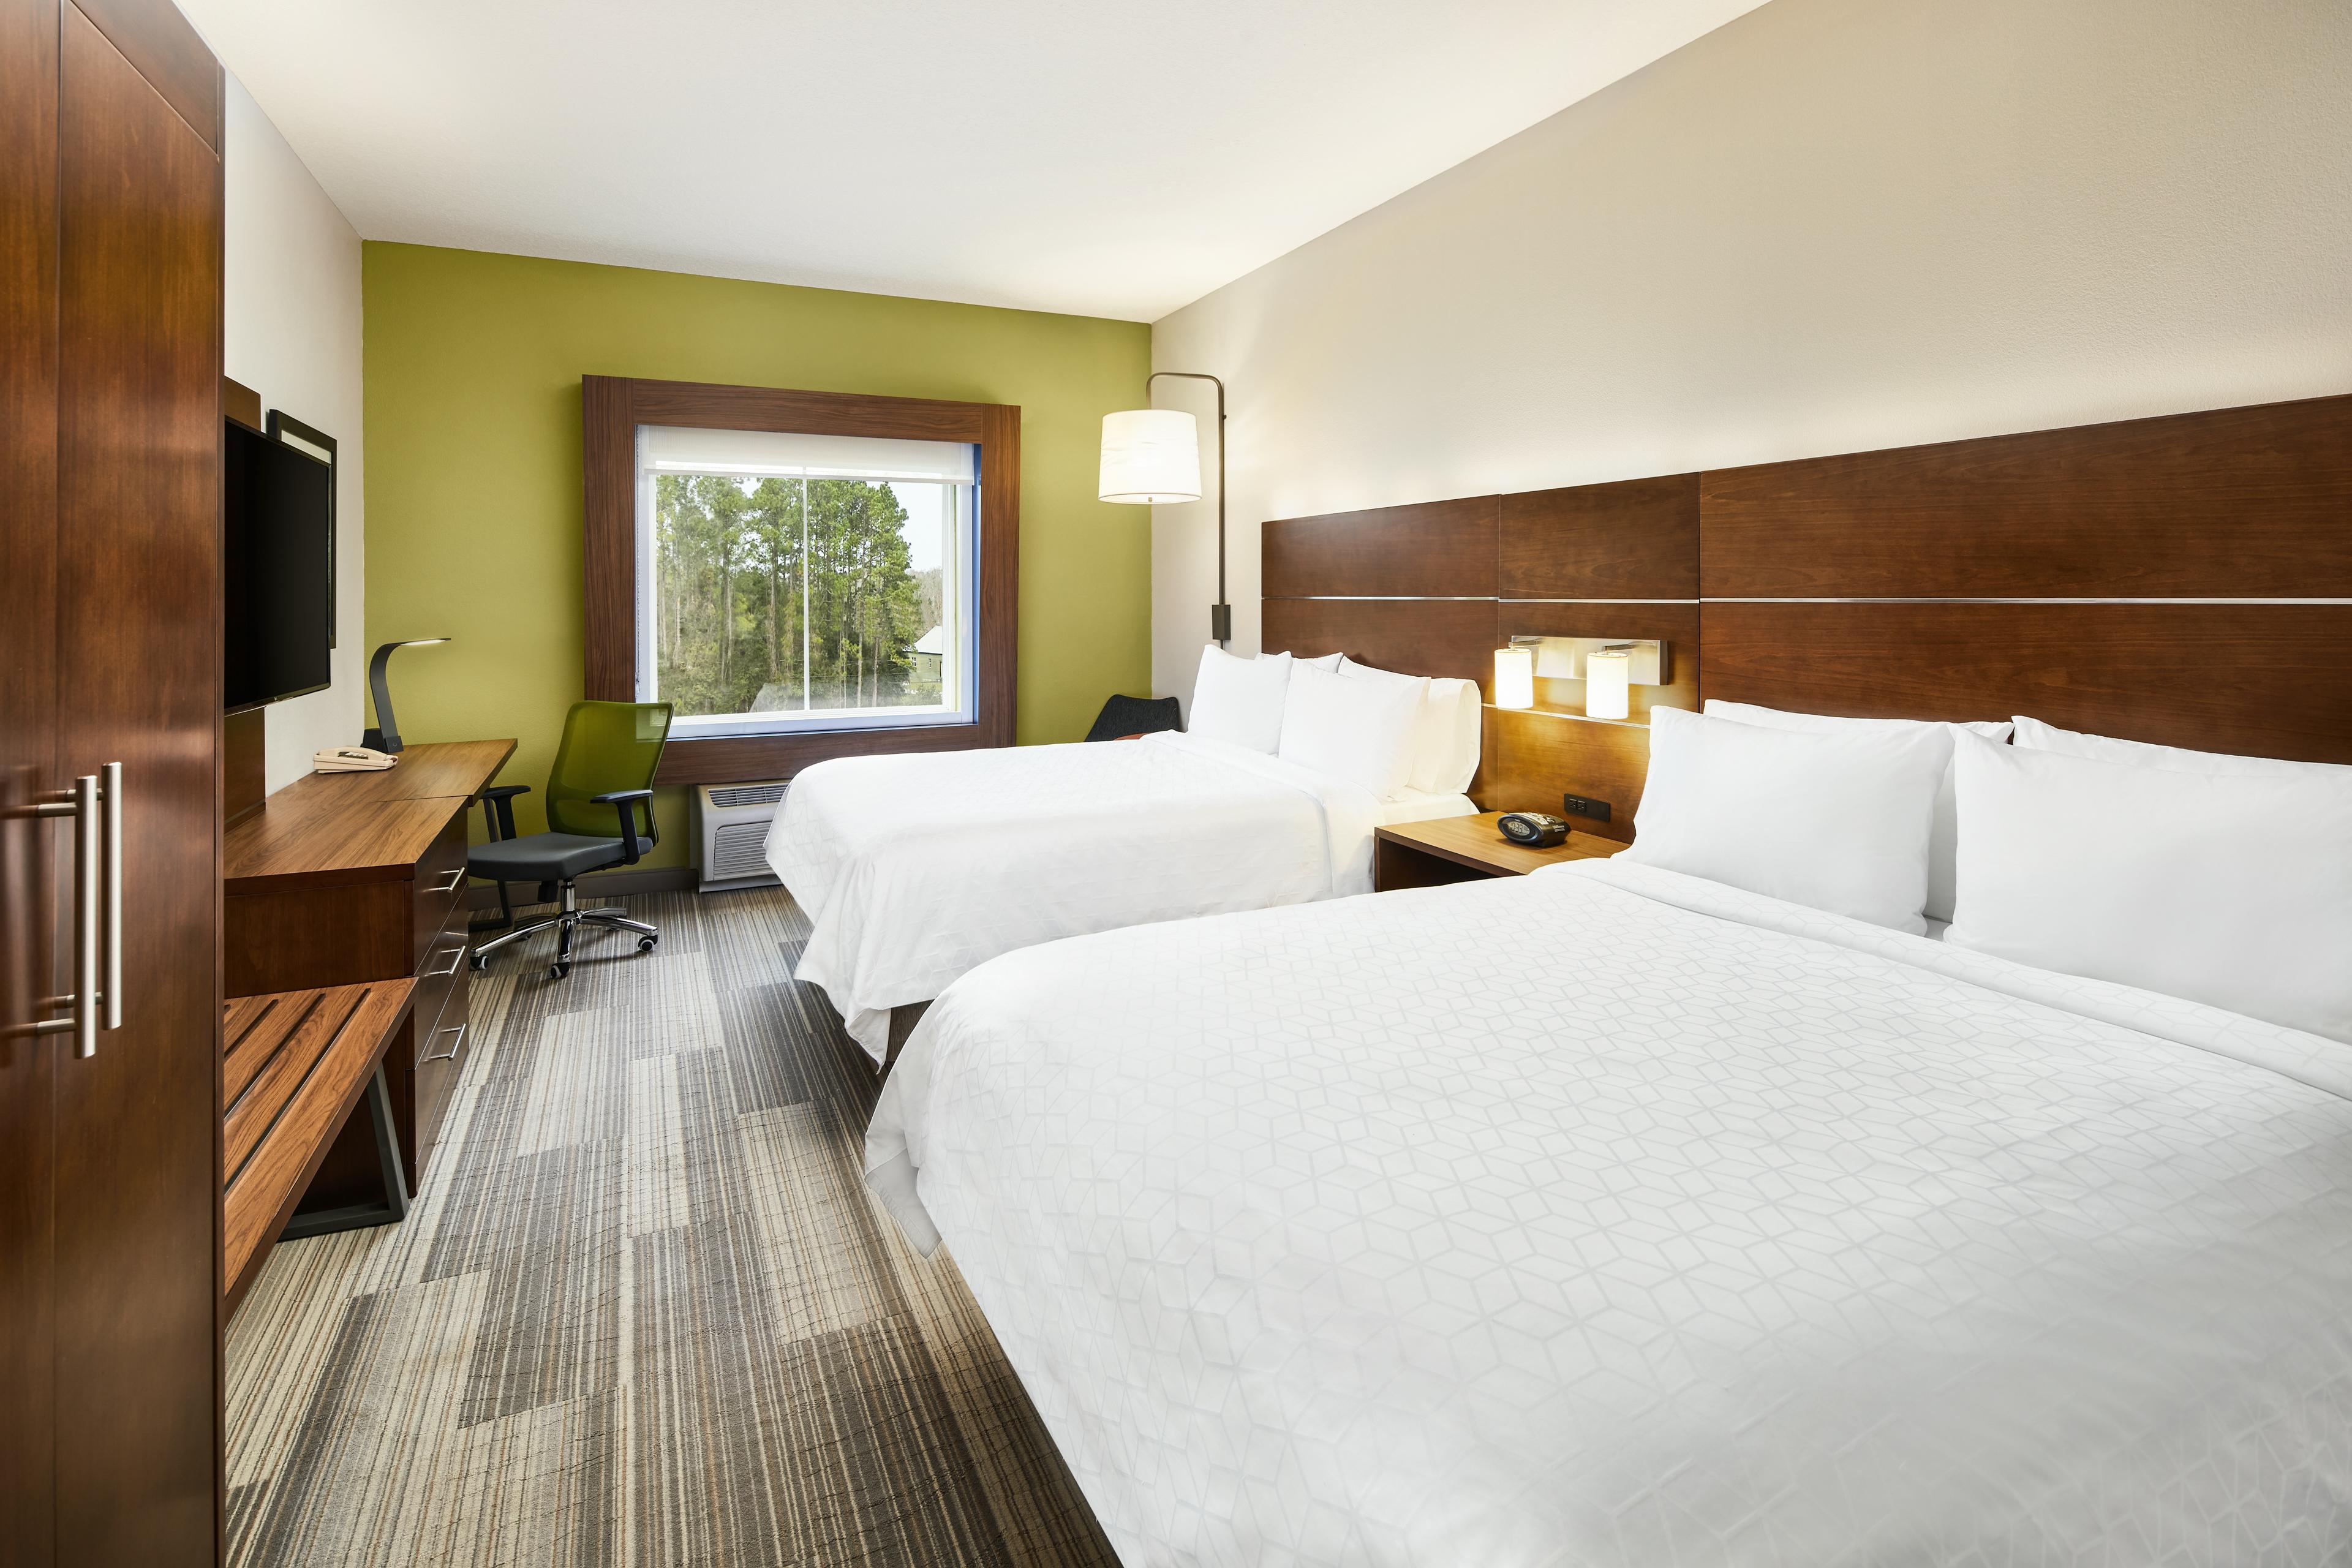 Our rooms are designed for corporate and leisure traveler alike.